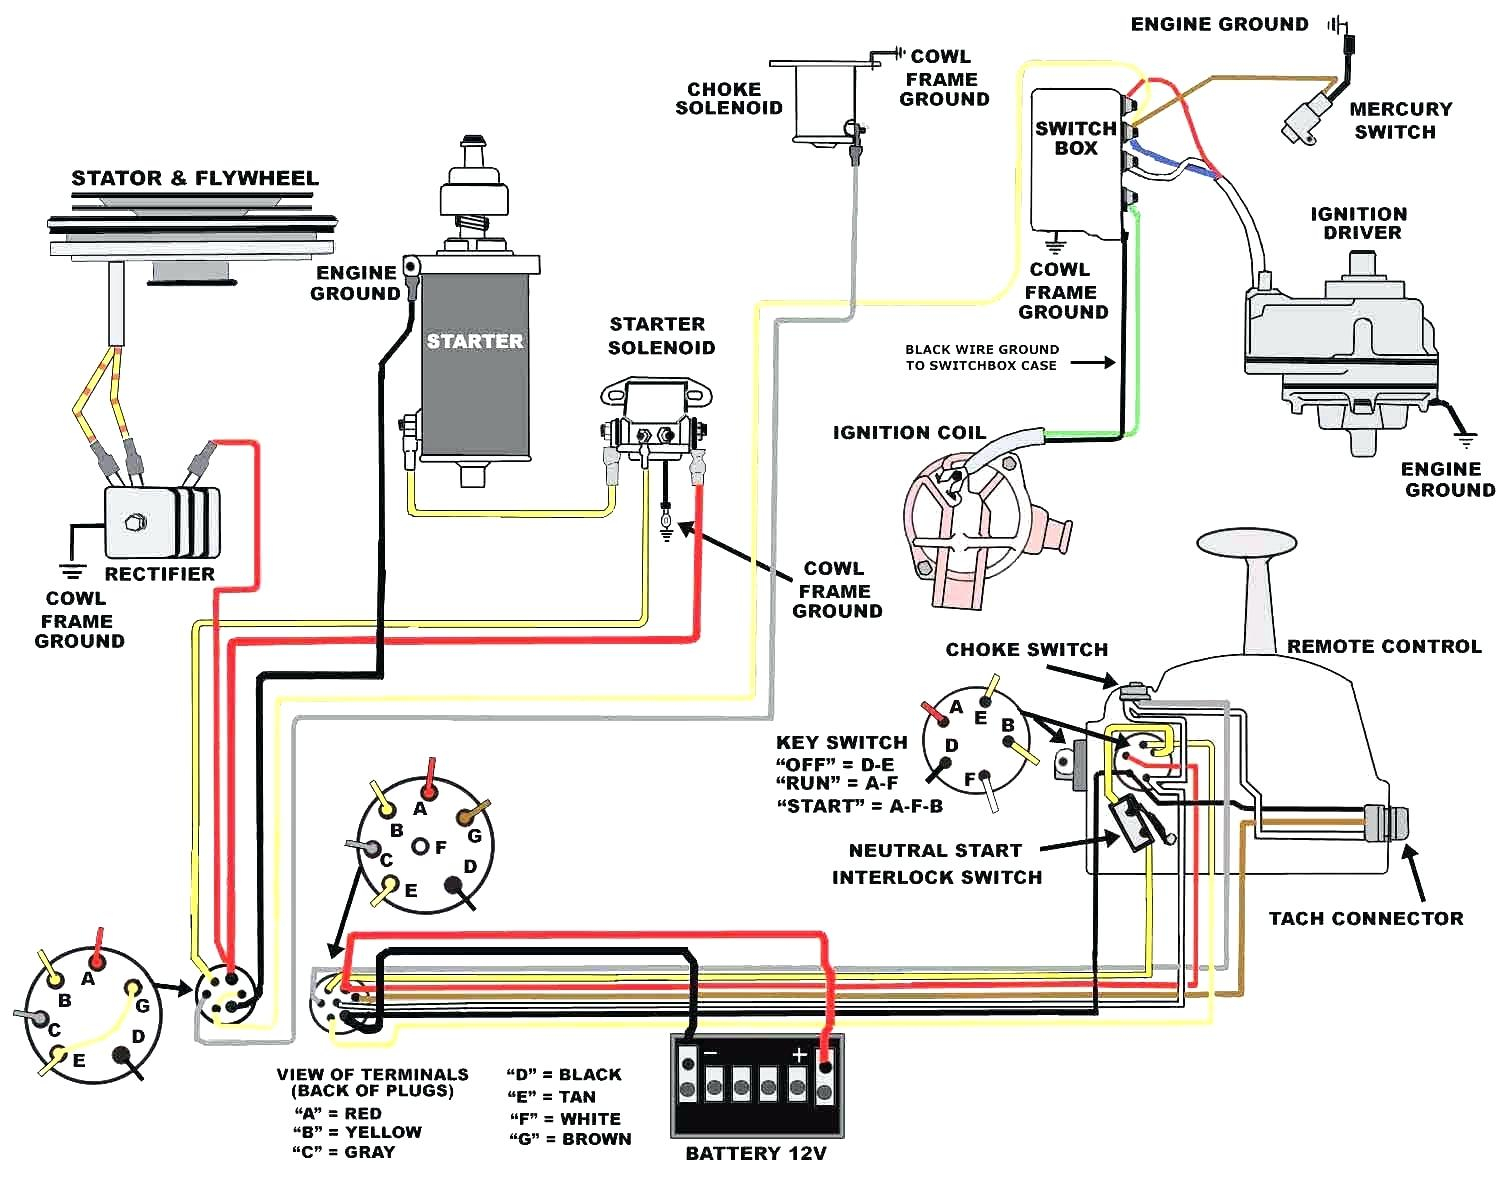 Johnson Ignition Switch Wiring Diagram Great Boat Outboard Endearing - Johnson Ignition Switch Wiring Diagram